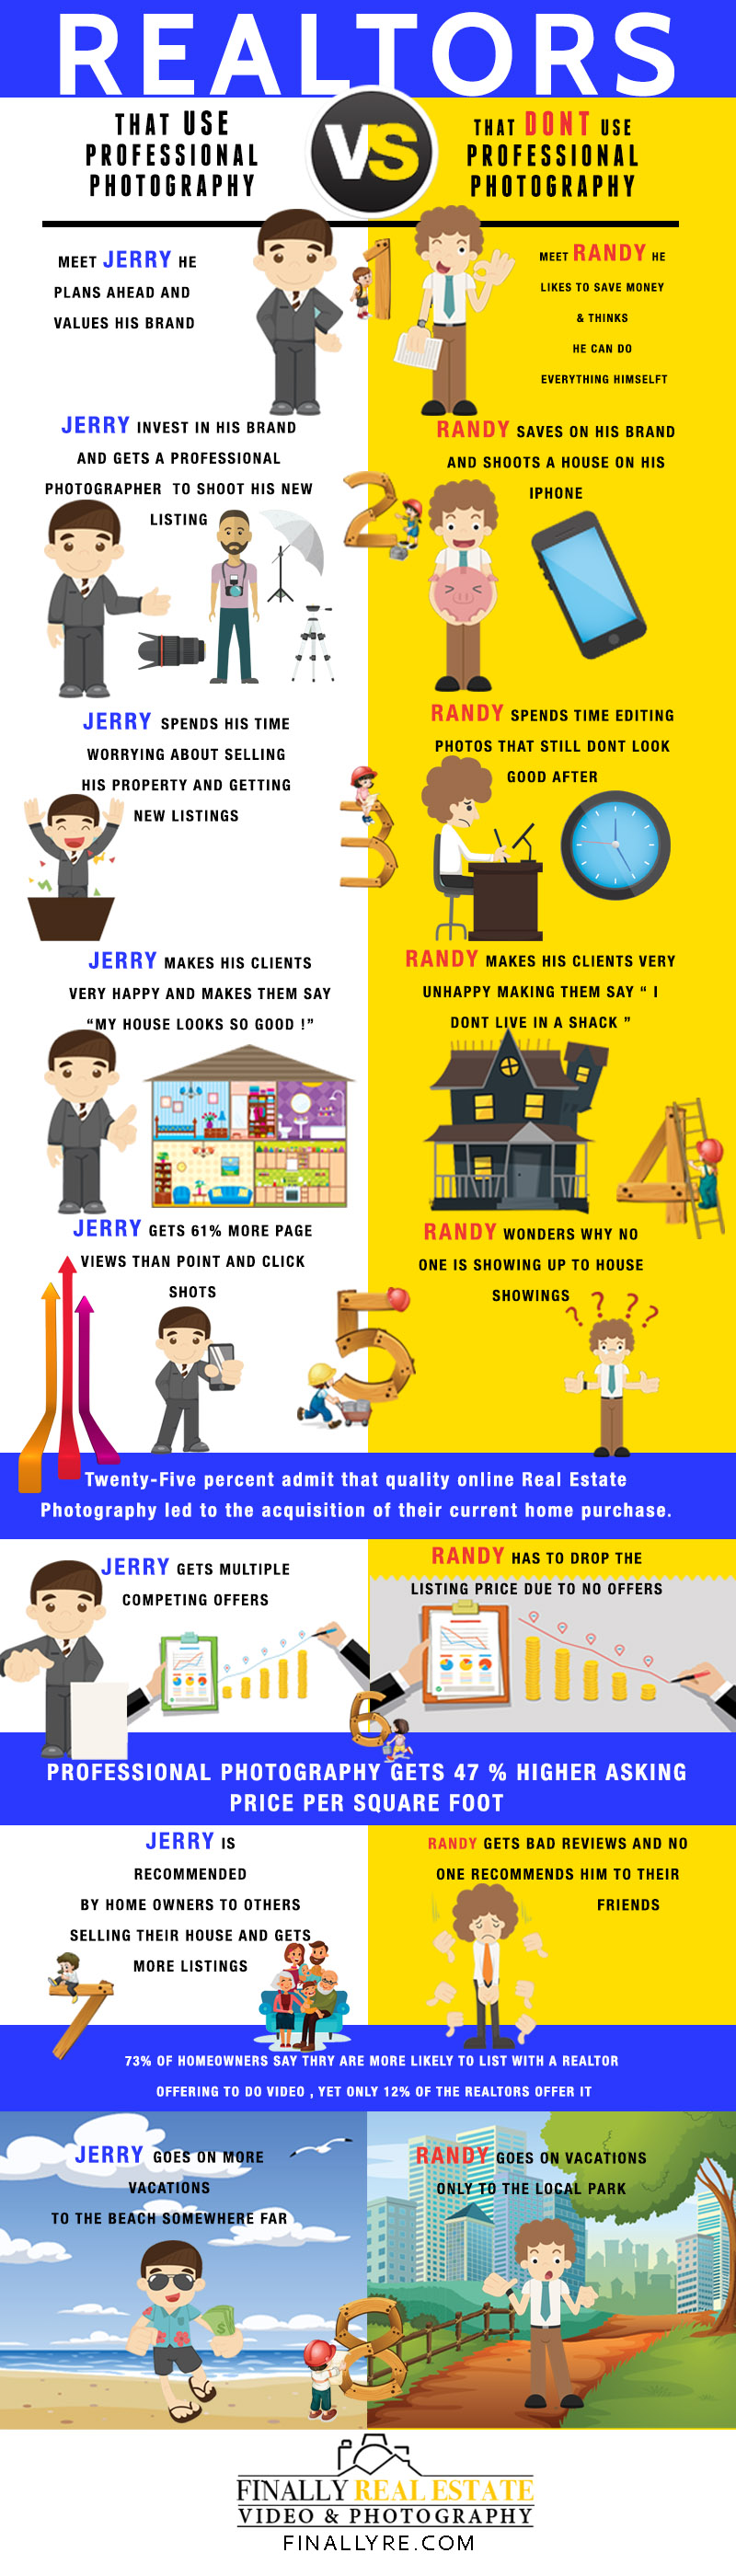 BENEFITS OF PROFESSIONAL REAL ESTATE PHOTOGRAPHY INFOGRAPHIC